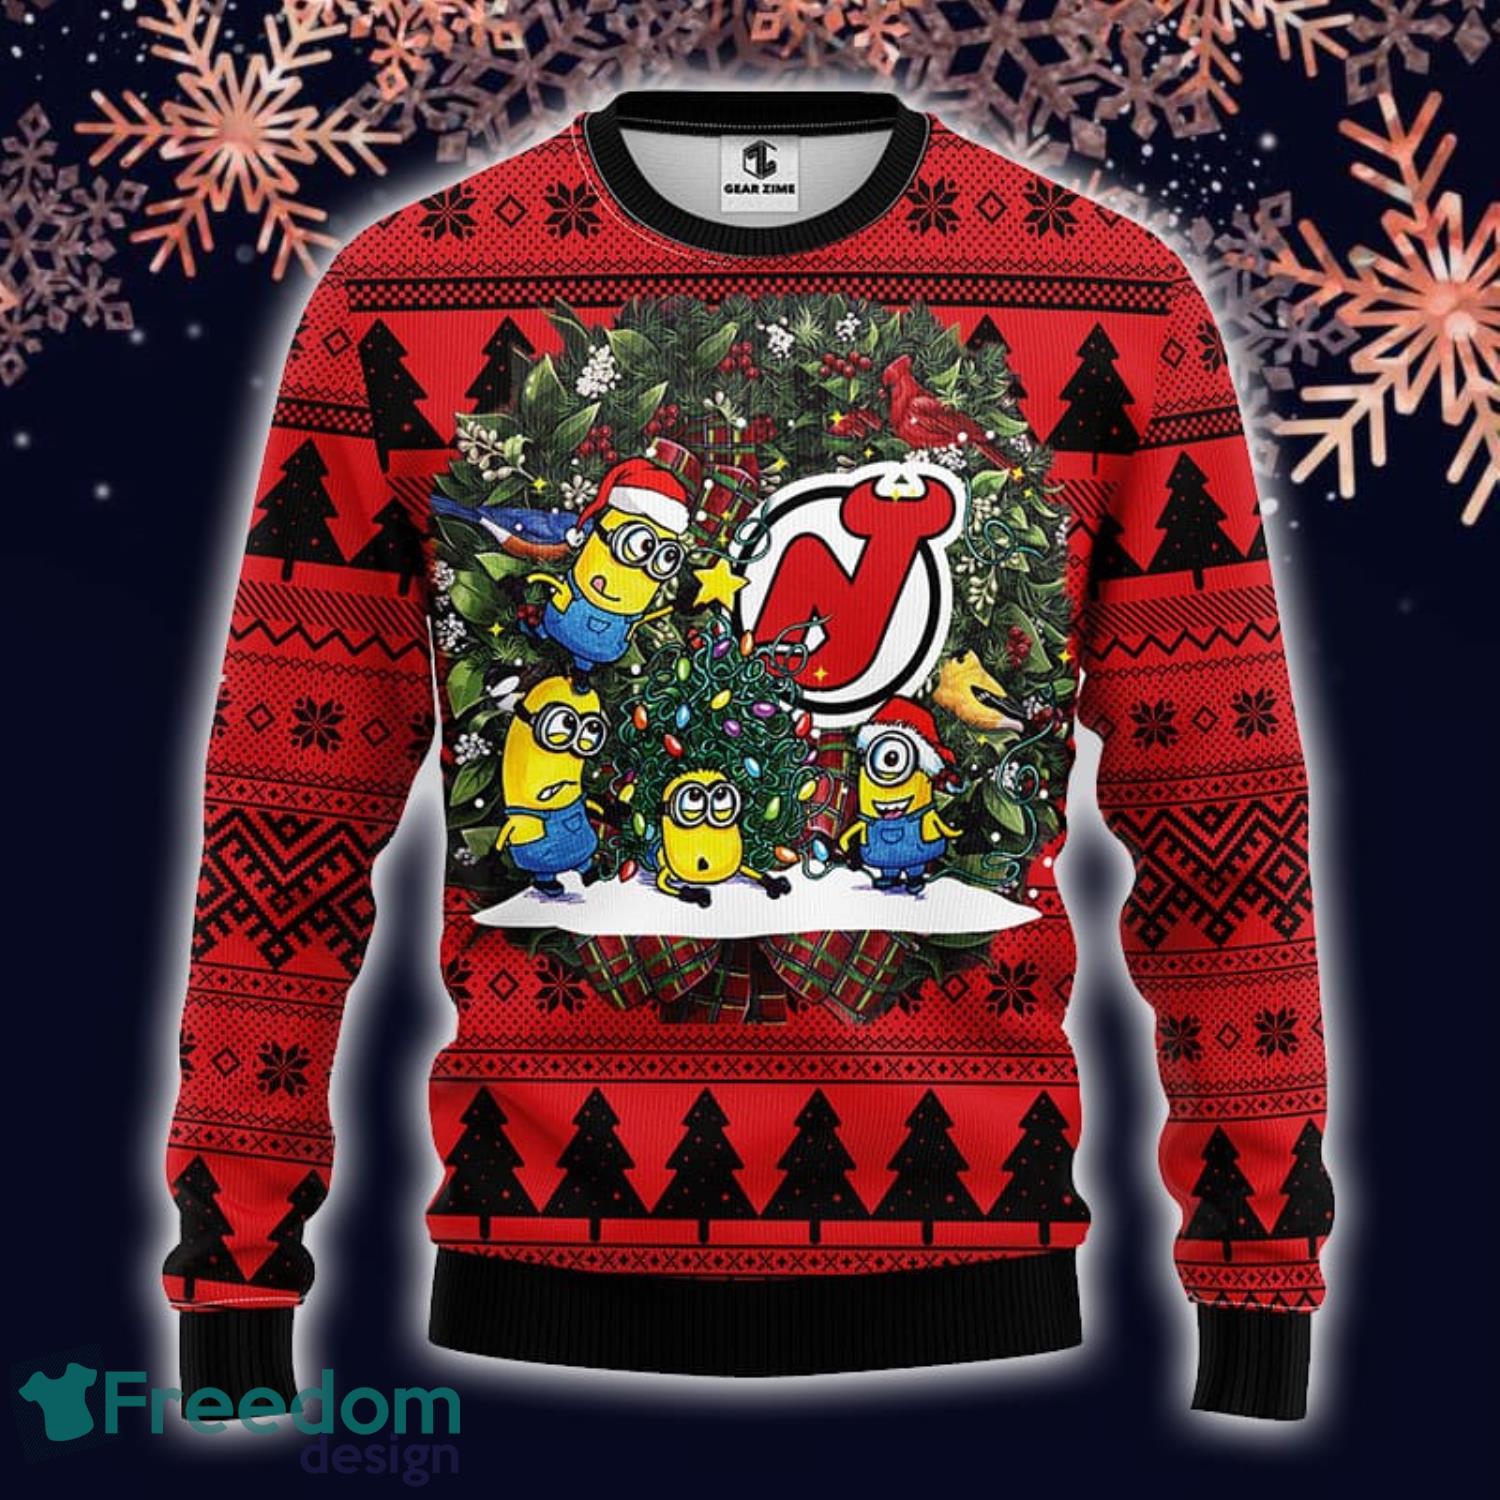 New Jersey Devils (NHL) Christmas Ugly Sweater iPhone Wall…